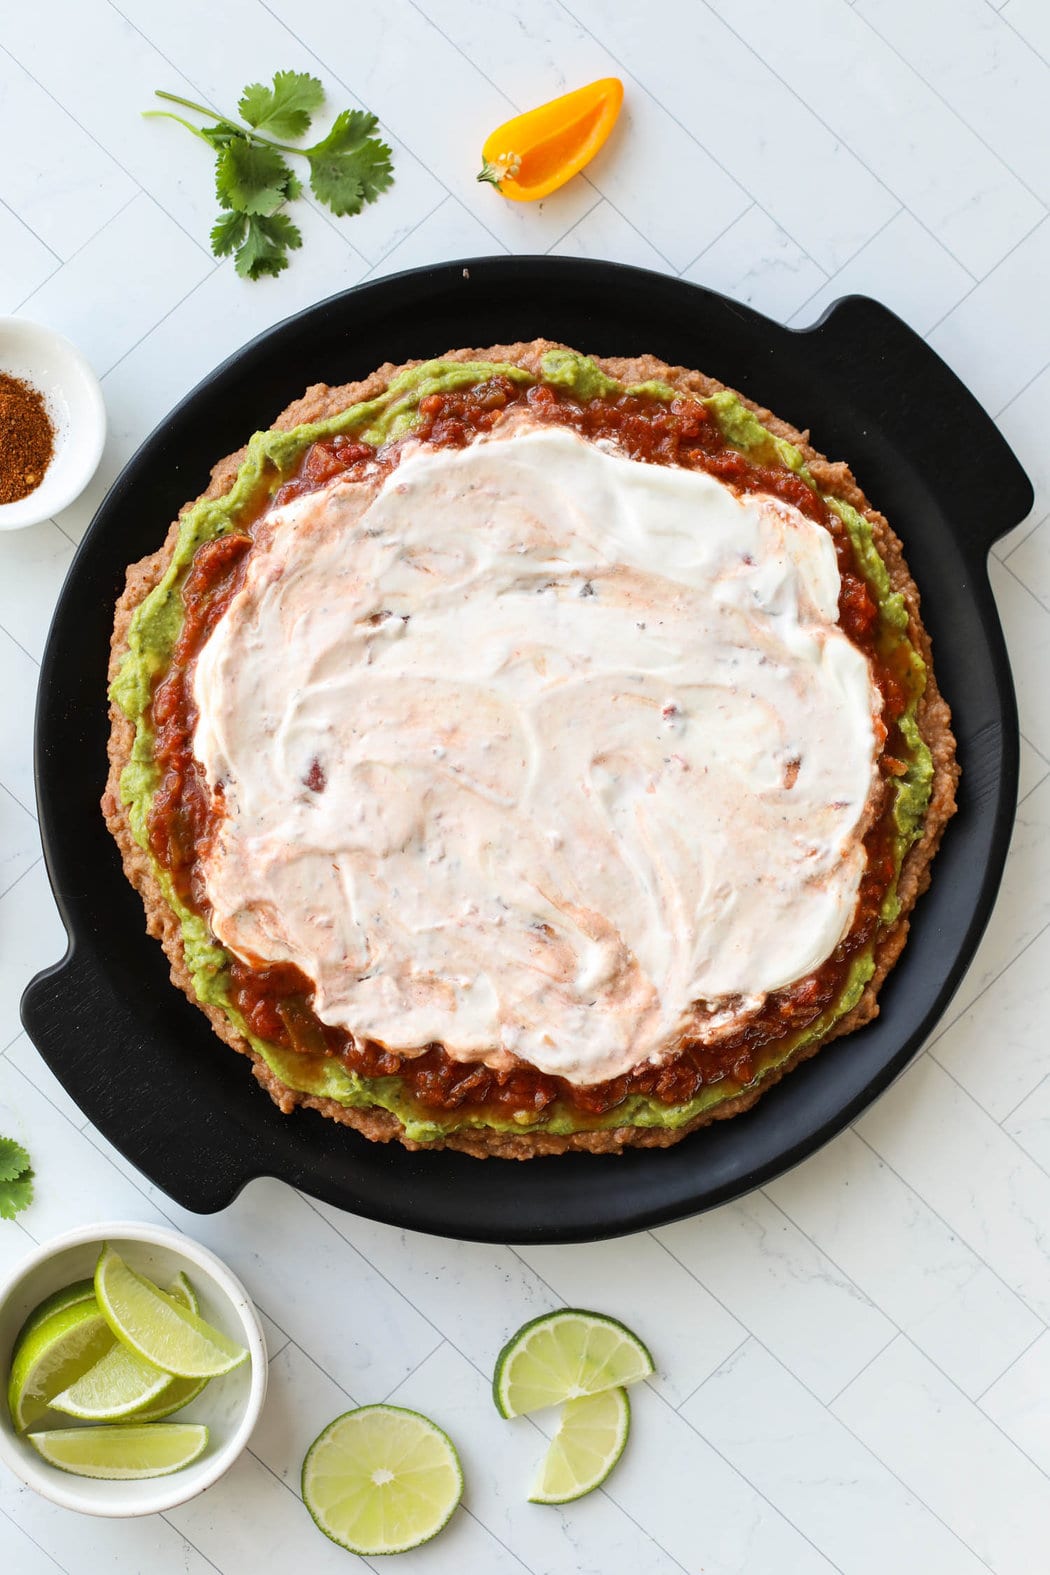 Black platter with layers of refried beans, guacamole, salsa, and sour cream spread in circle.